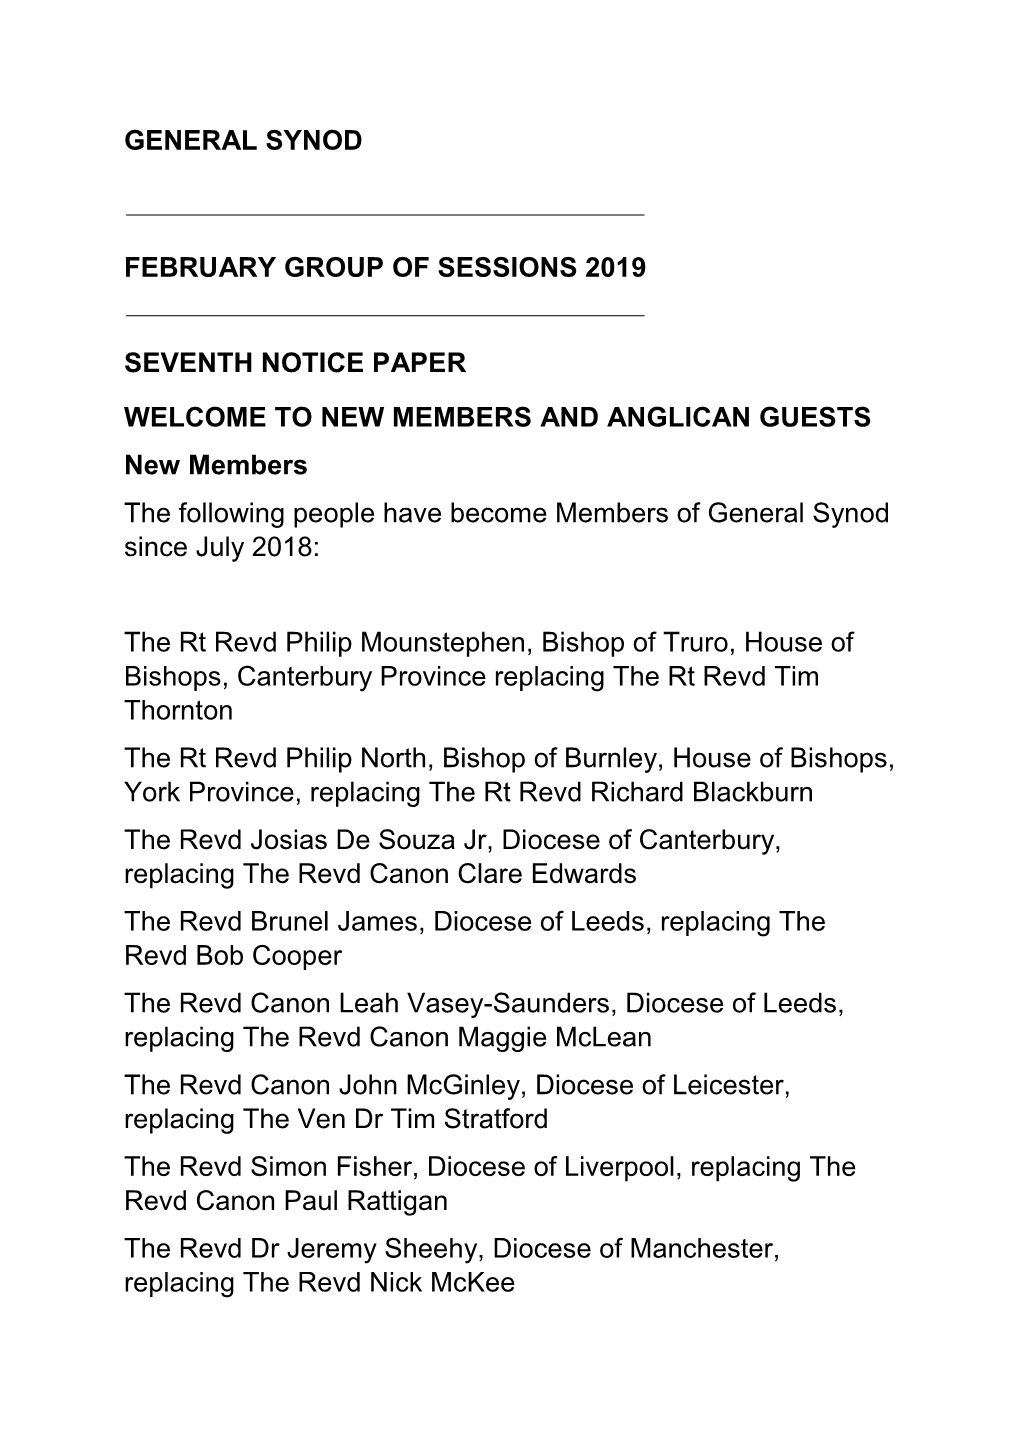 General Synod February Group